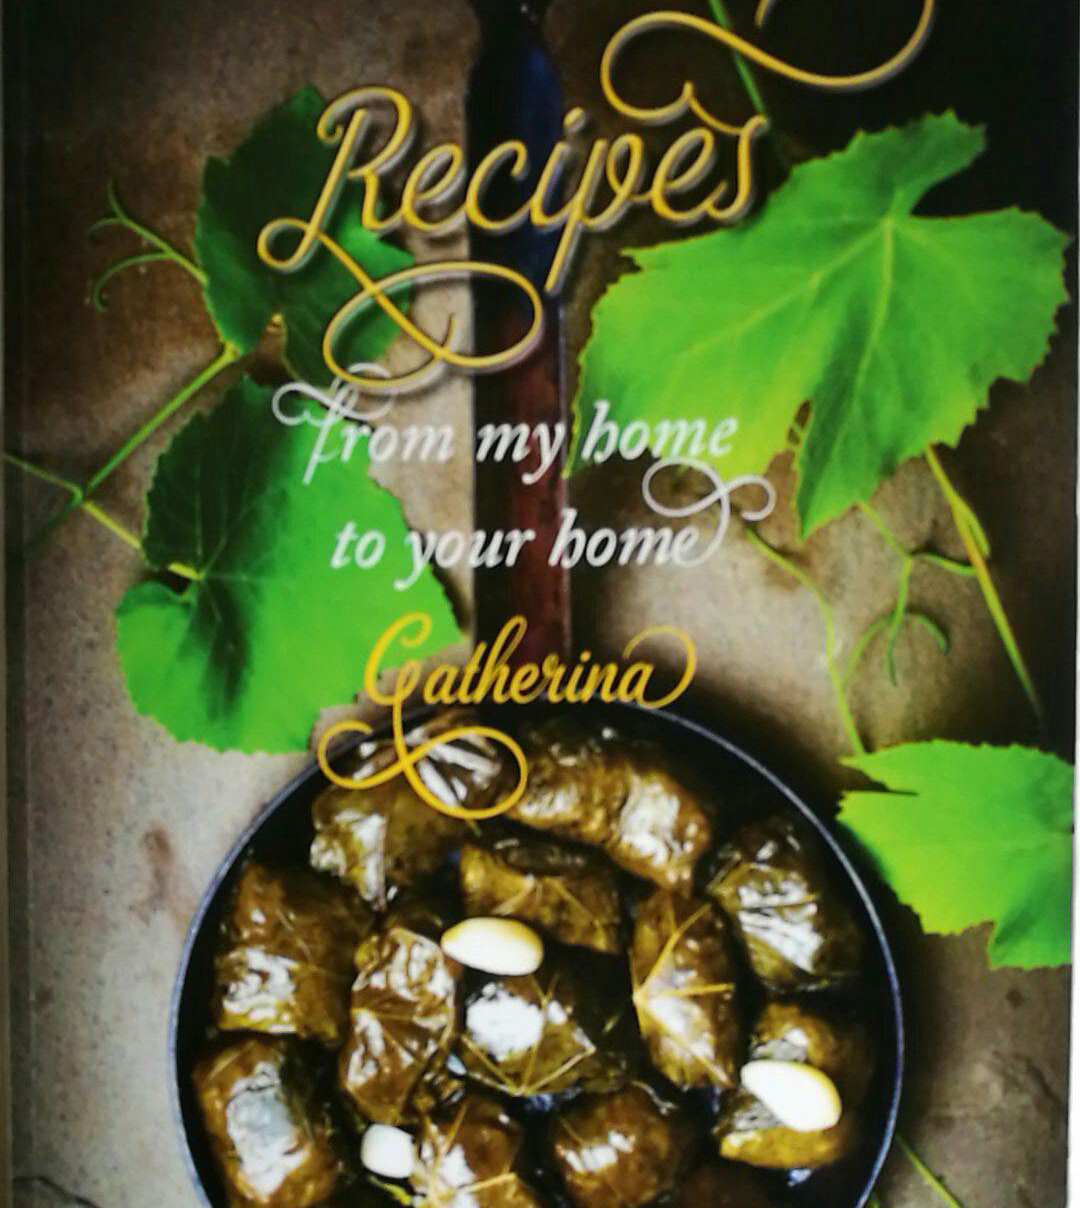 Ada Daher - Recipes from my home to your home